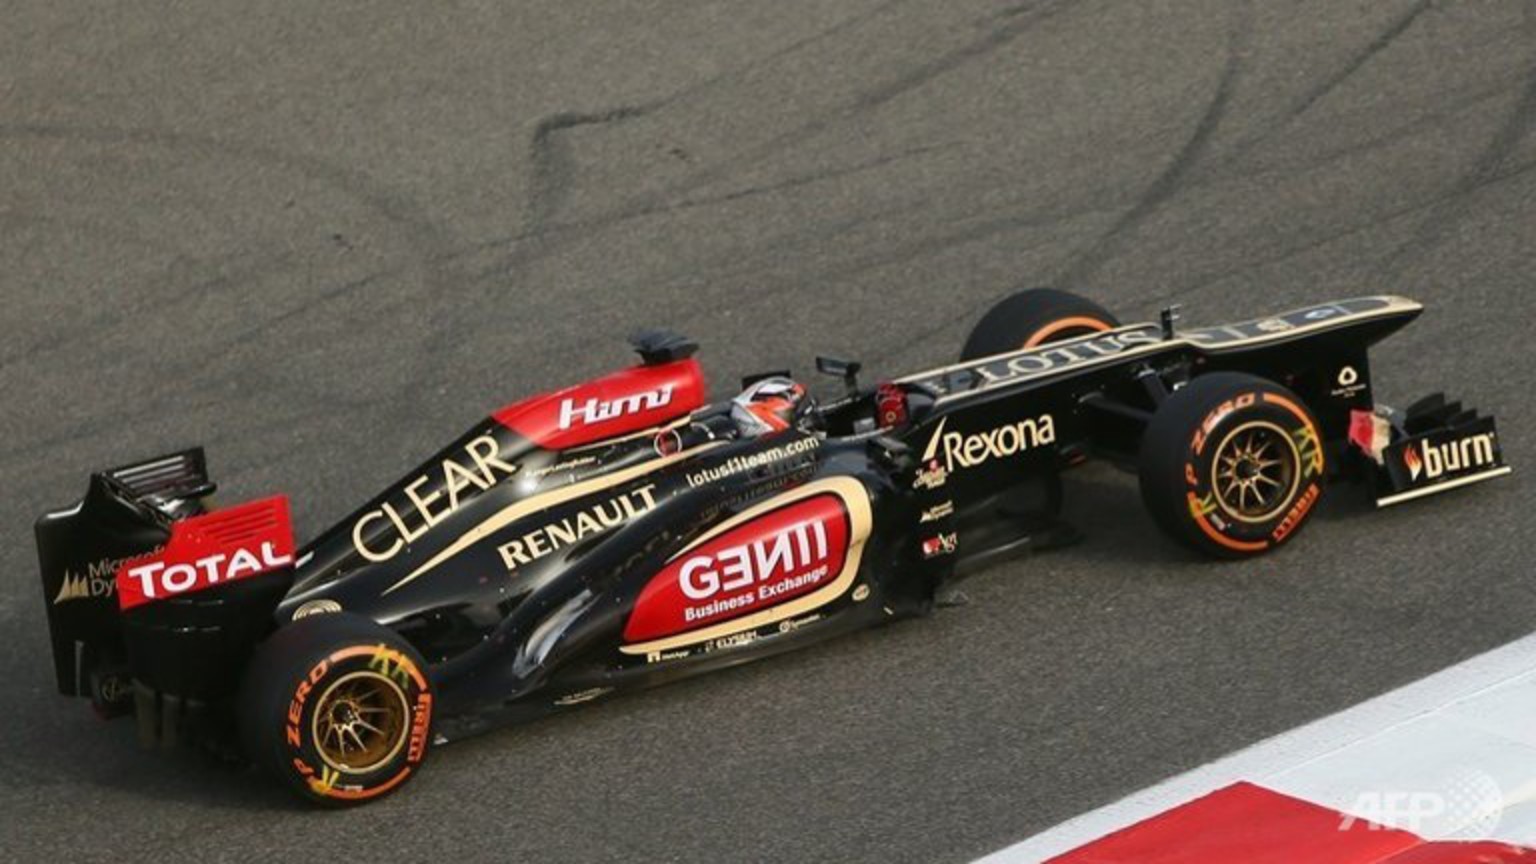 Motor Racing: Boullier heralds Lotus as title contenders - Channel ...